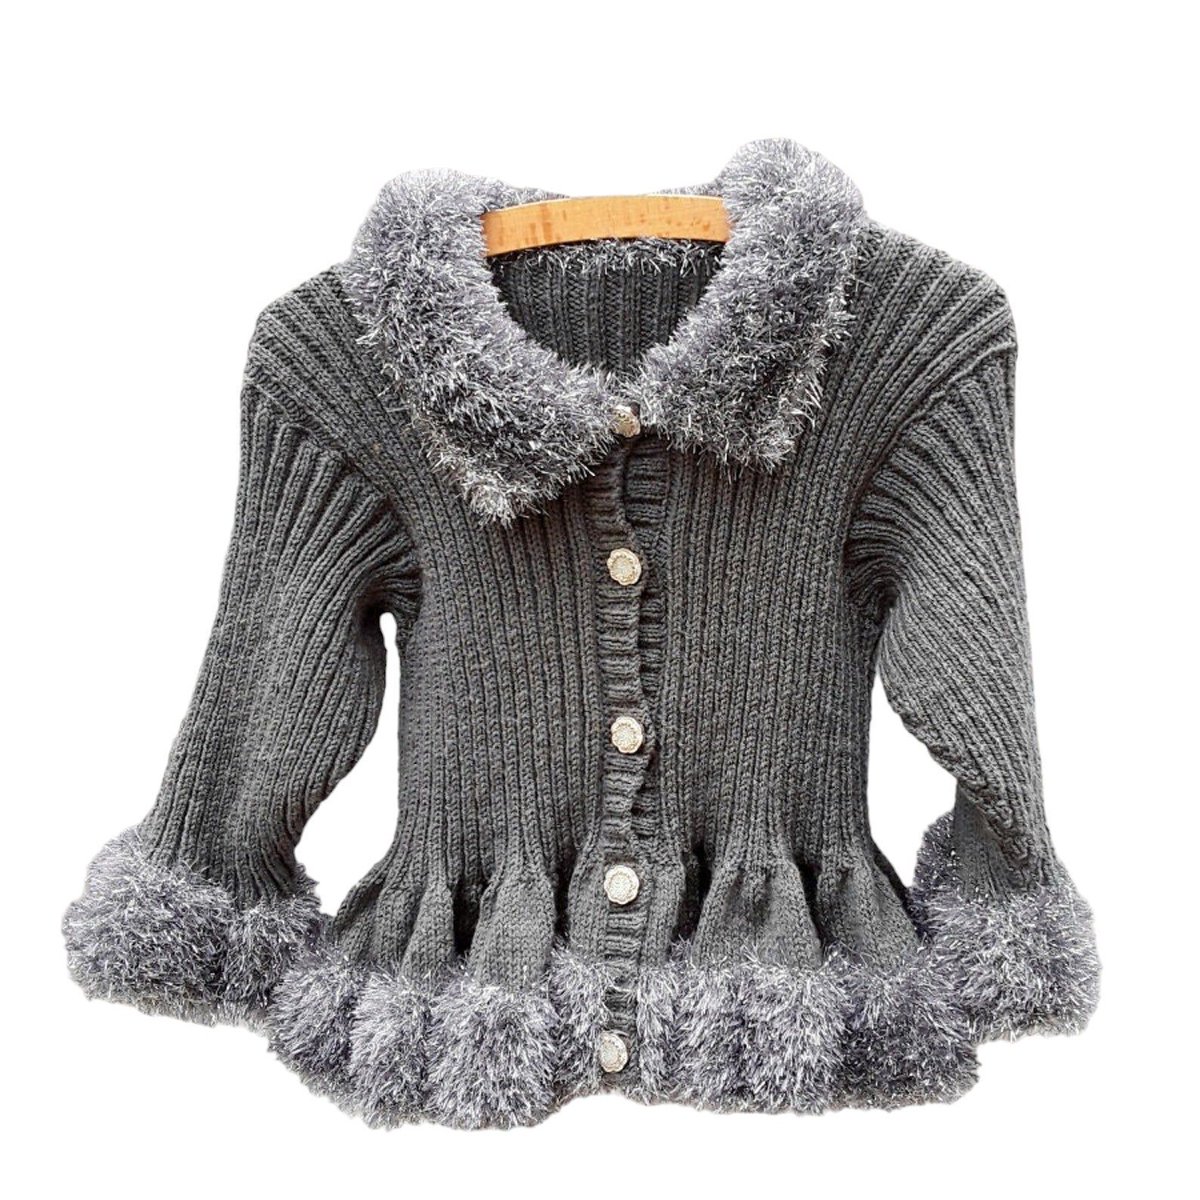 Check out this adorable hand knitted girls cardigan! The sparkly tinsel yarn trim adds a touch of glamour. Perfect for little fashionistas. Get yours now on #Etsy. #knittingtopia #buybritish knittingtopia.etsy.com/listing/168055… #MHHSBD #craftbizparty #girlsknitwear